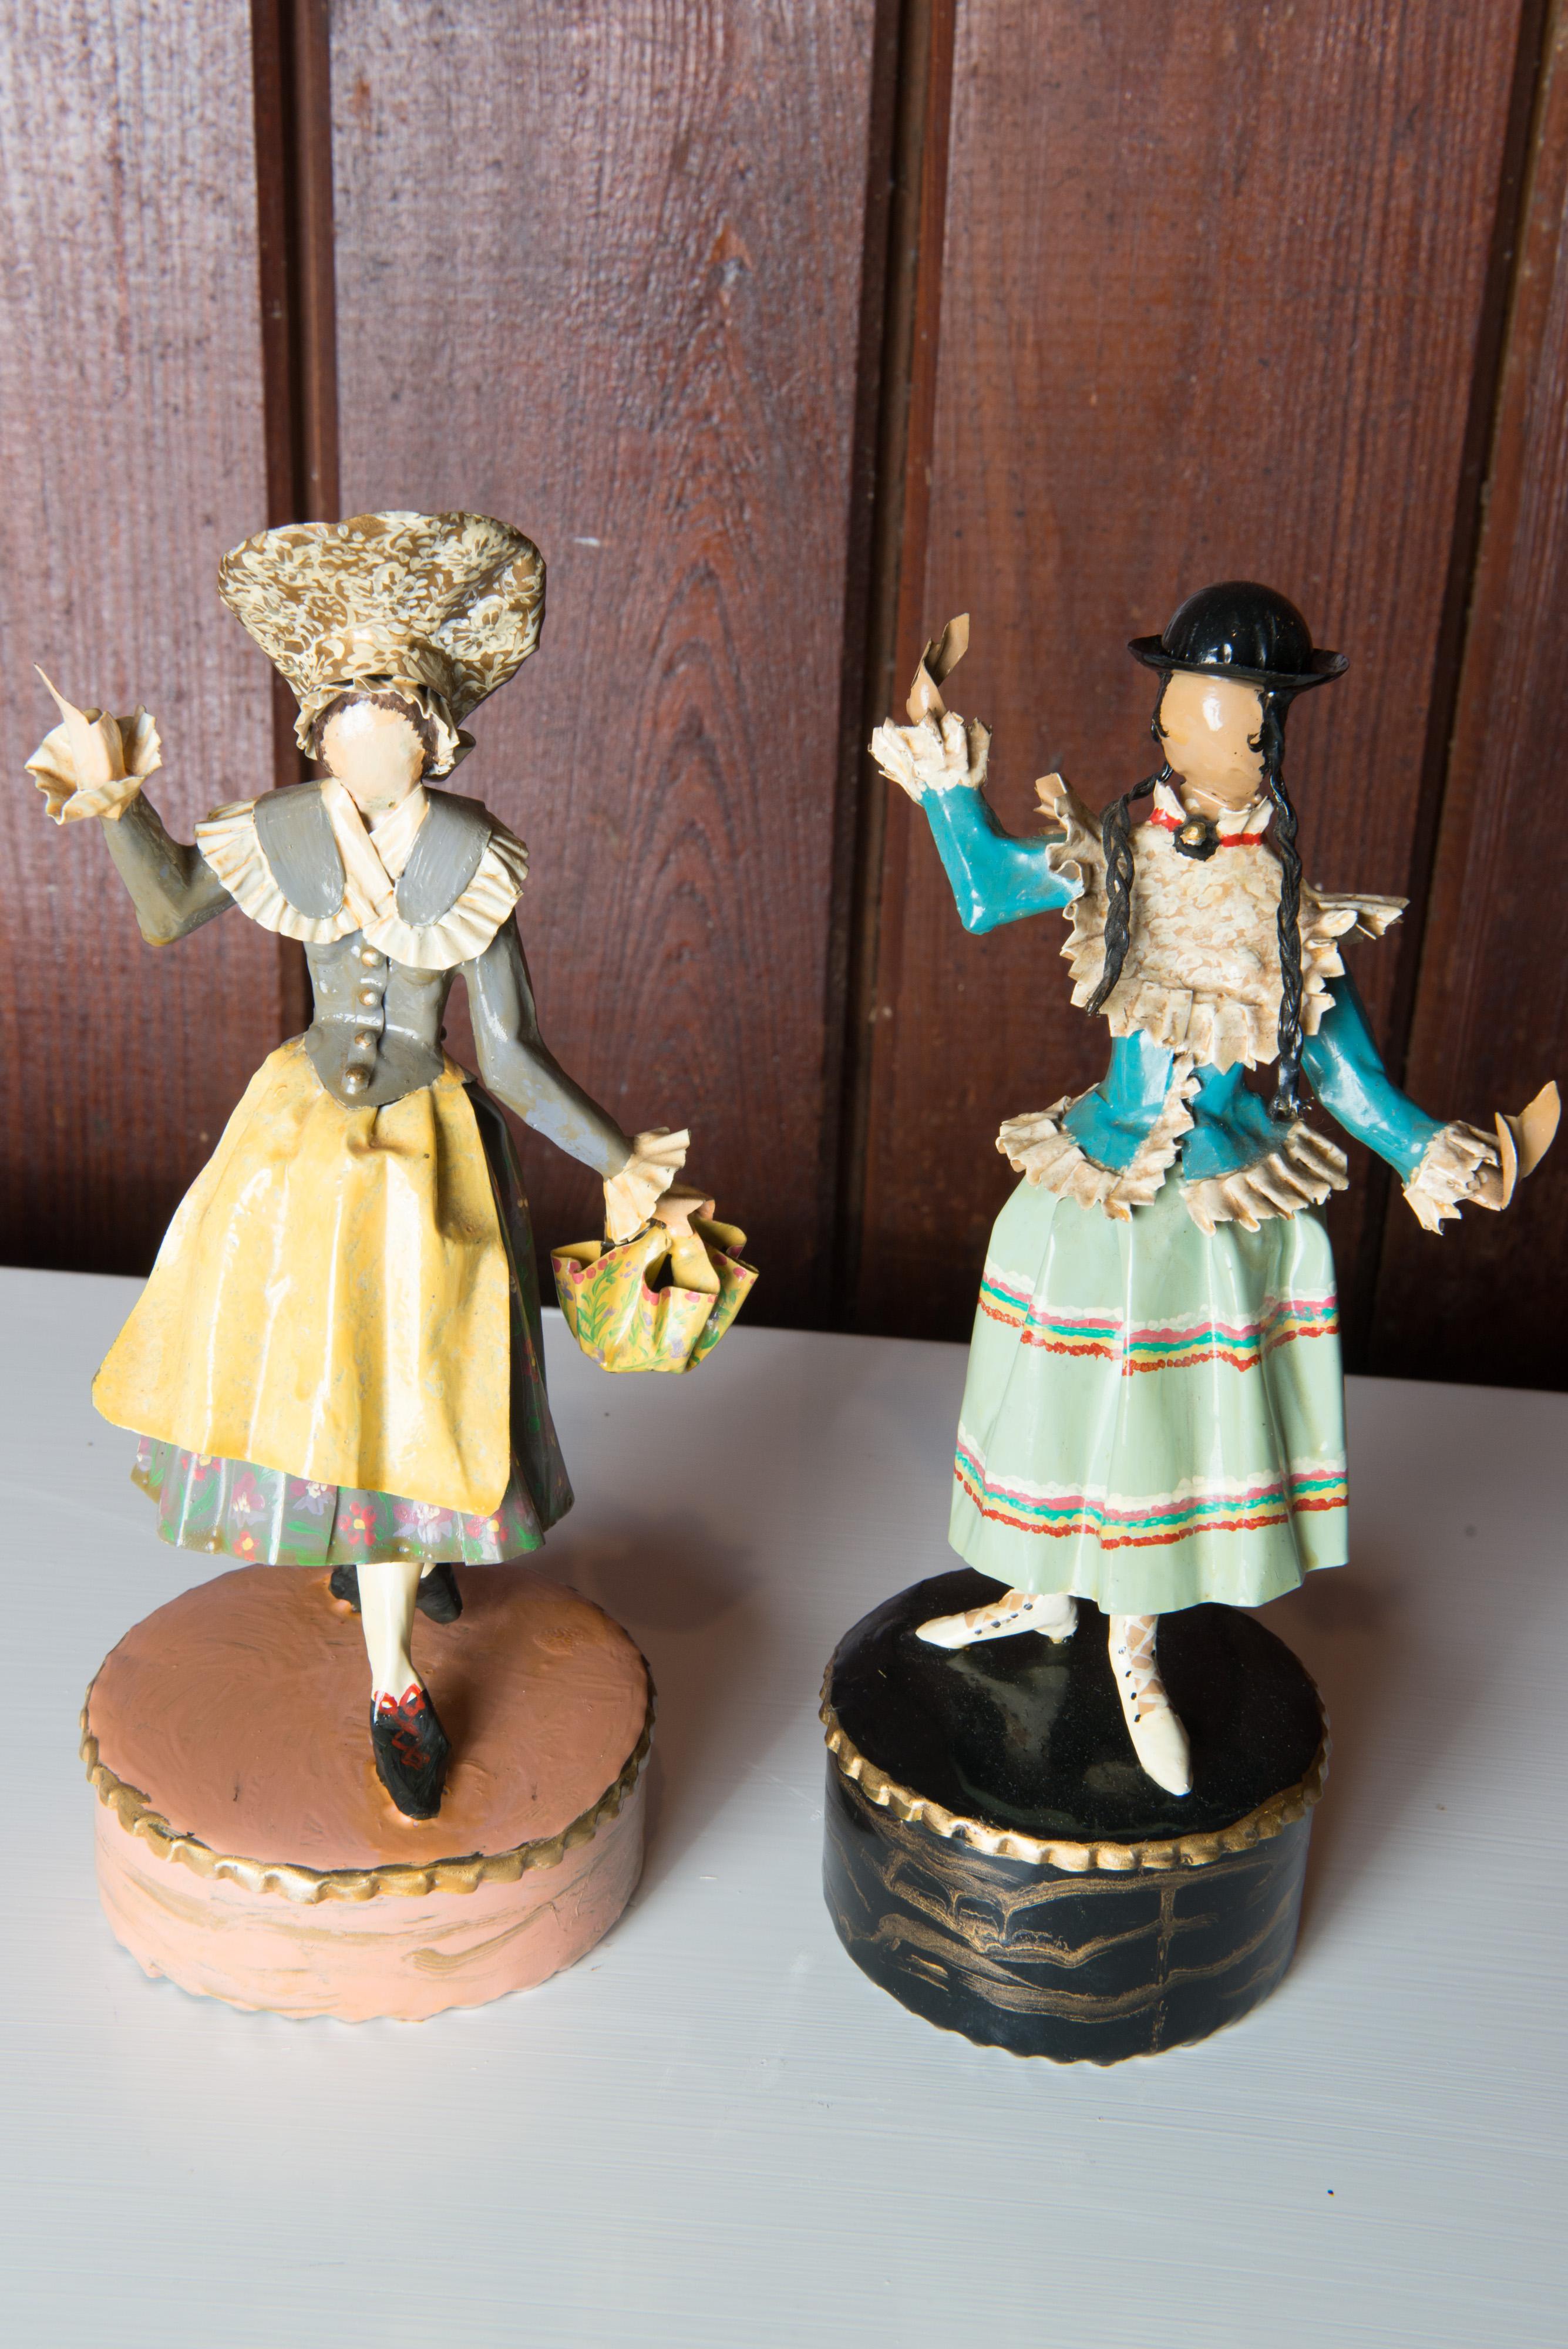 American Pair of Figural Sculptures in Traditional Austrian Costumes by Lee Menichetti For Sale